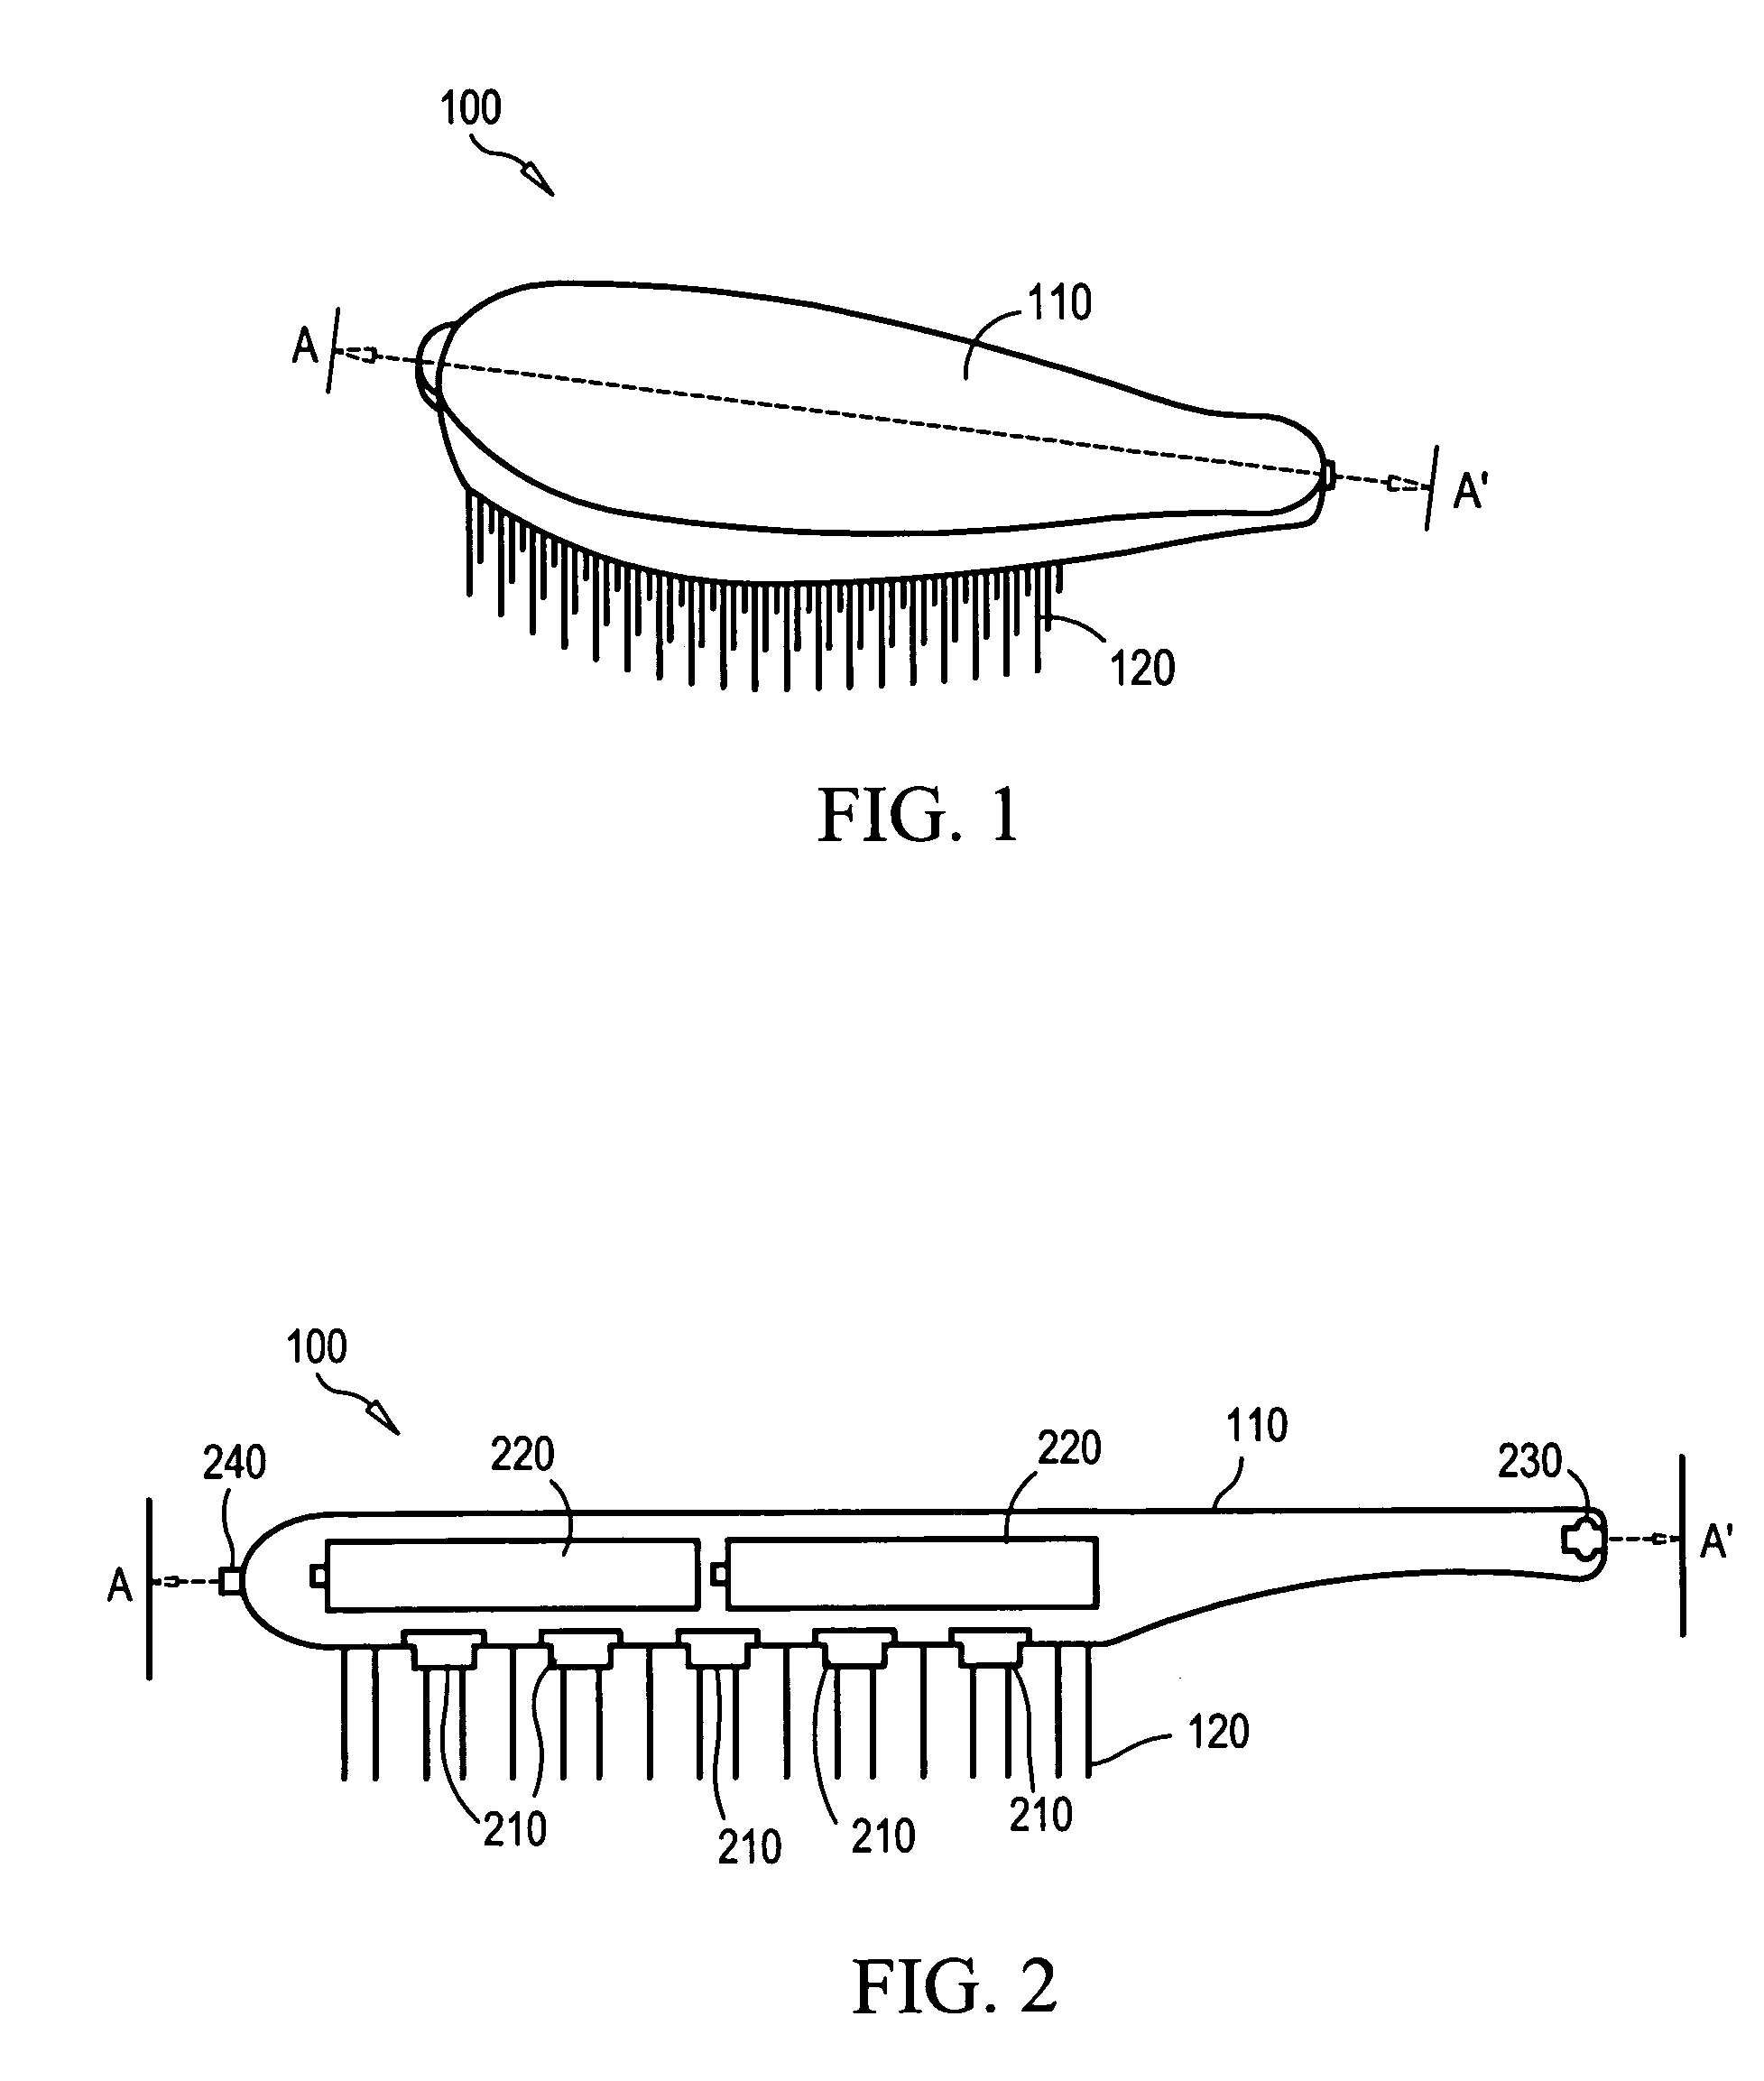 Hair restoration device and methods of using and manufacturing the same